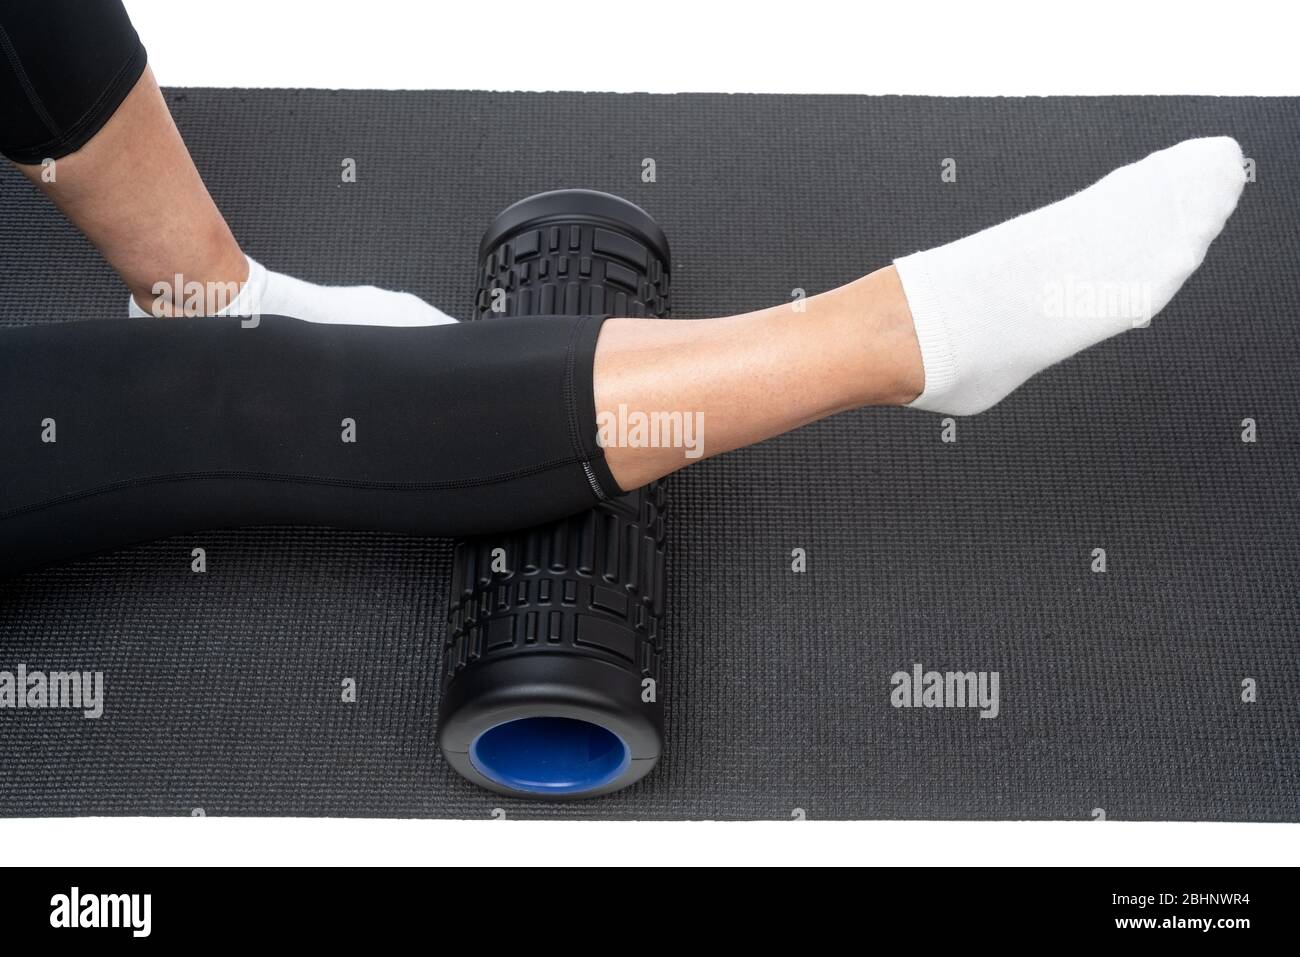 A middle-aged woman on a myofascial roller does a leg shin massage on a white background. Stock Photo